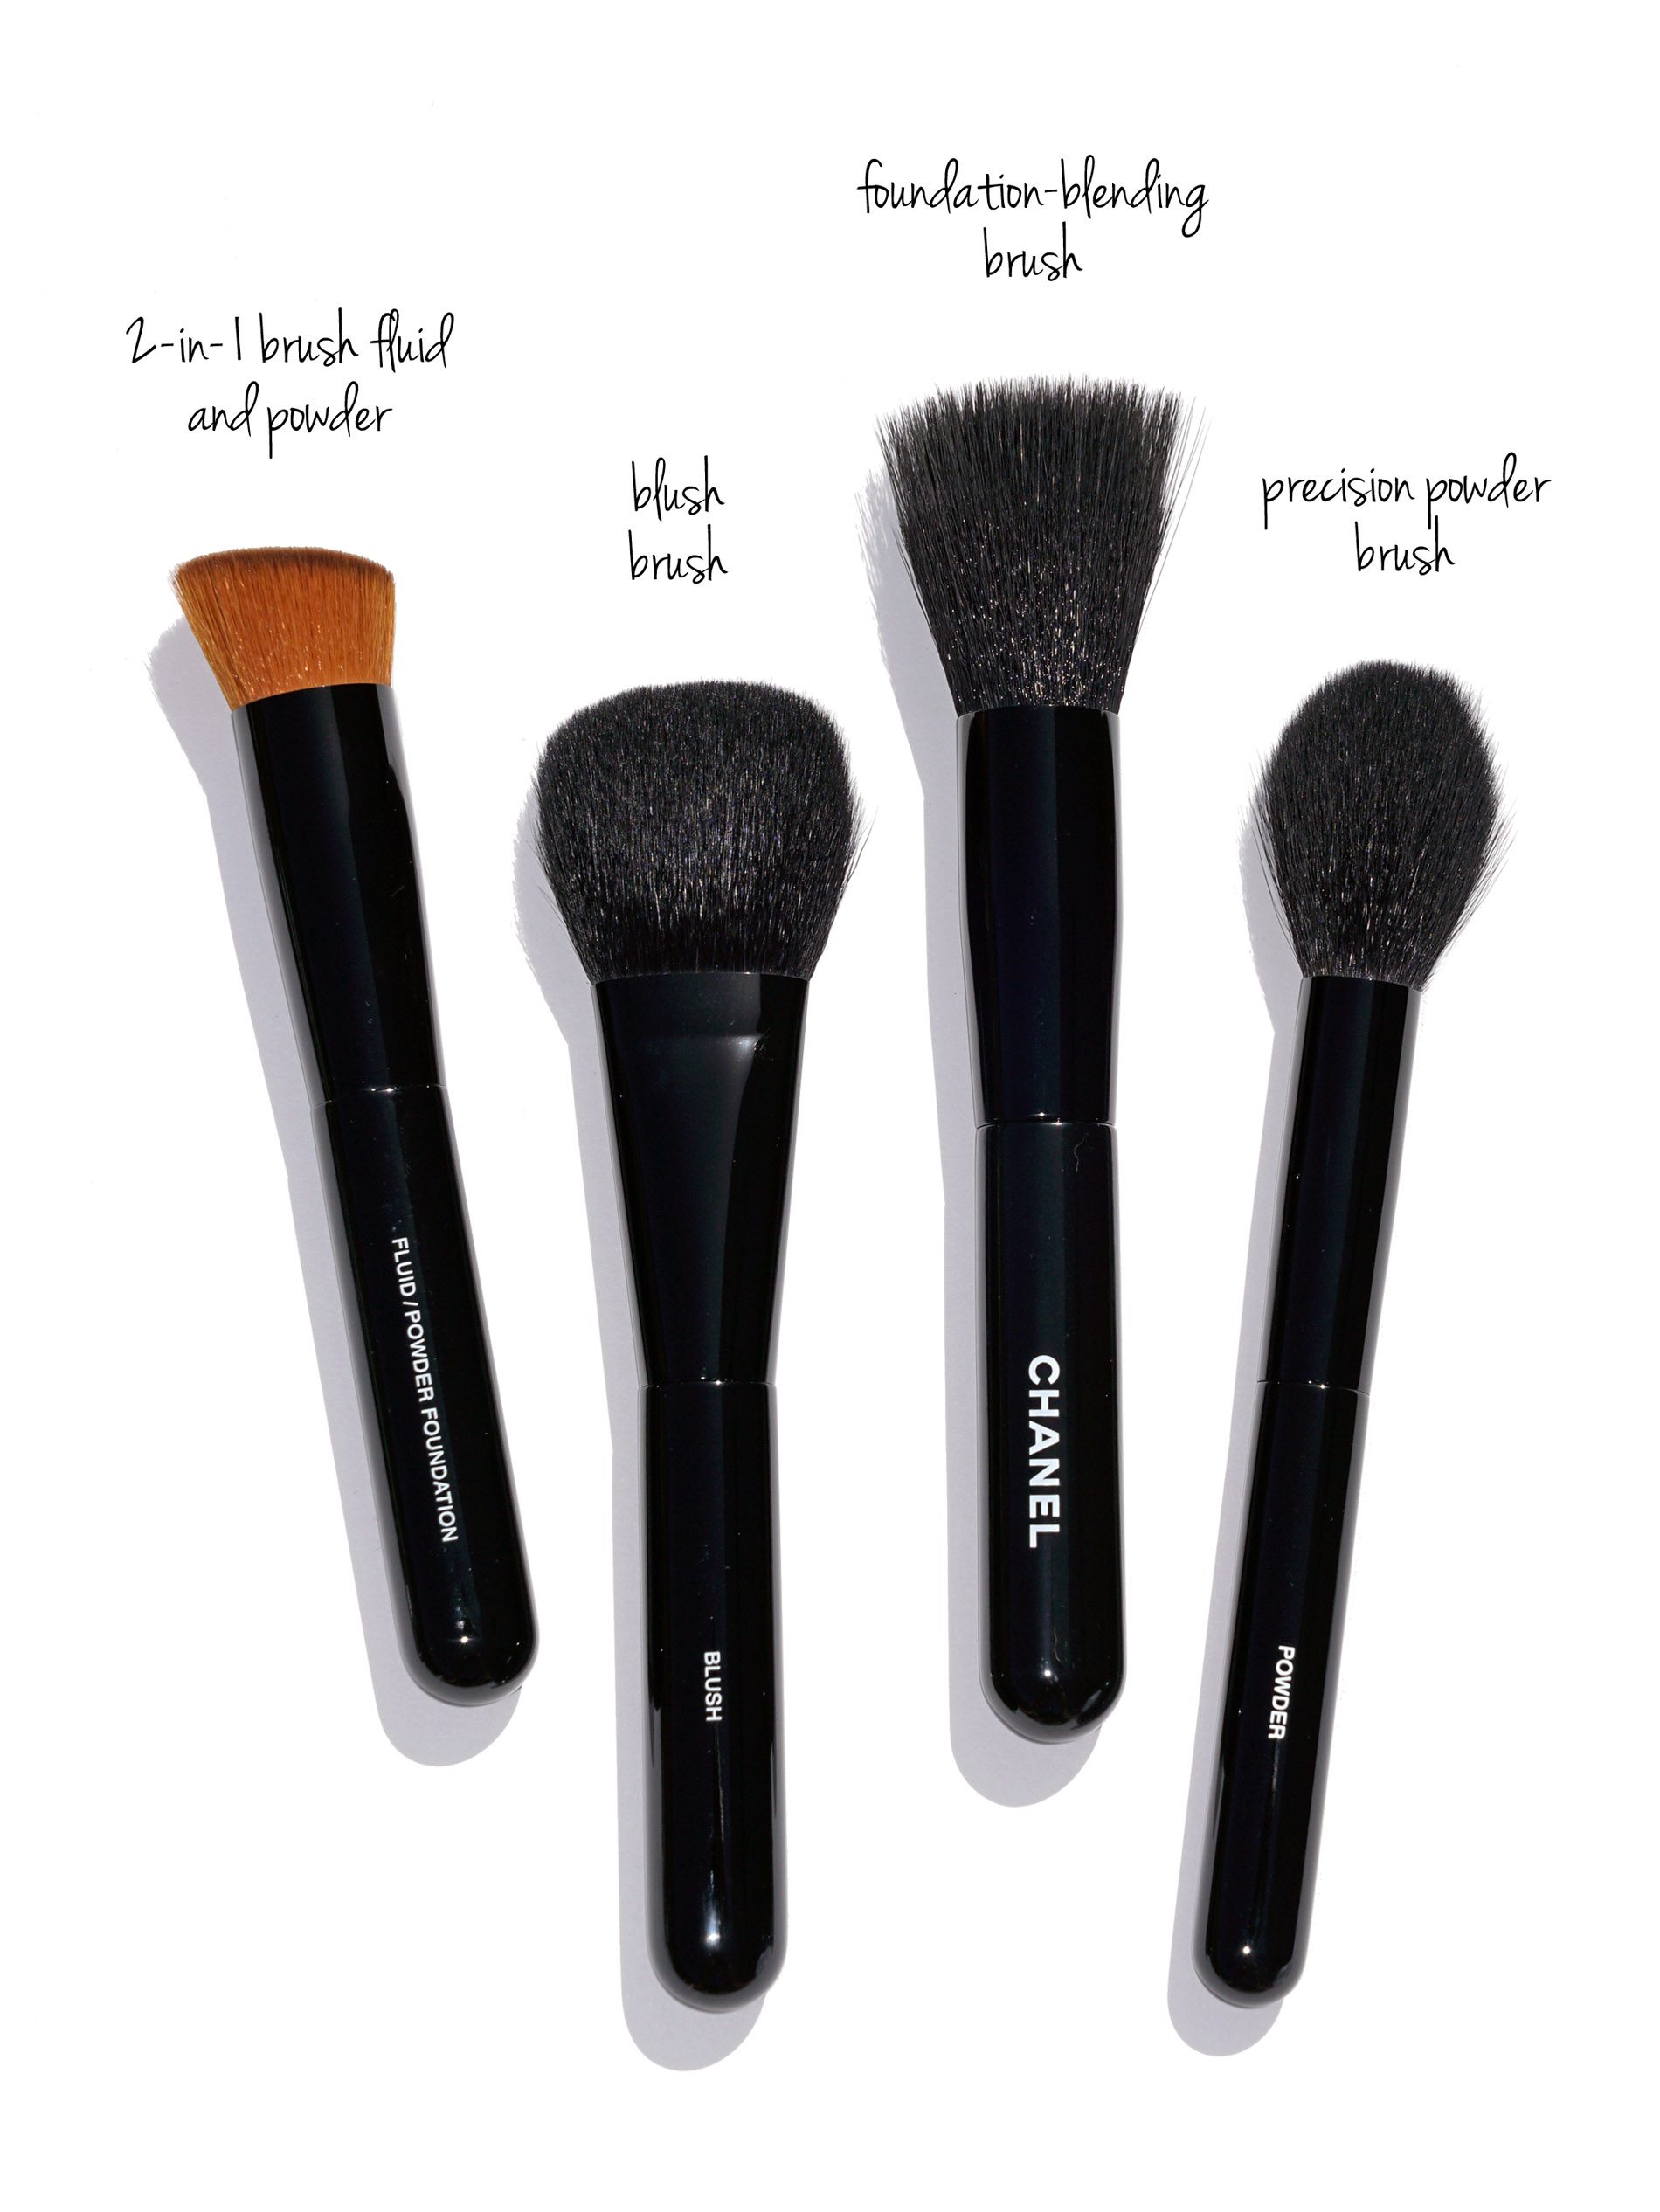 Chanel Makeup Brushes - New Design | The Beauty Look Book